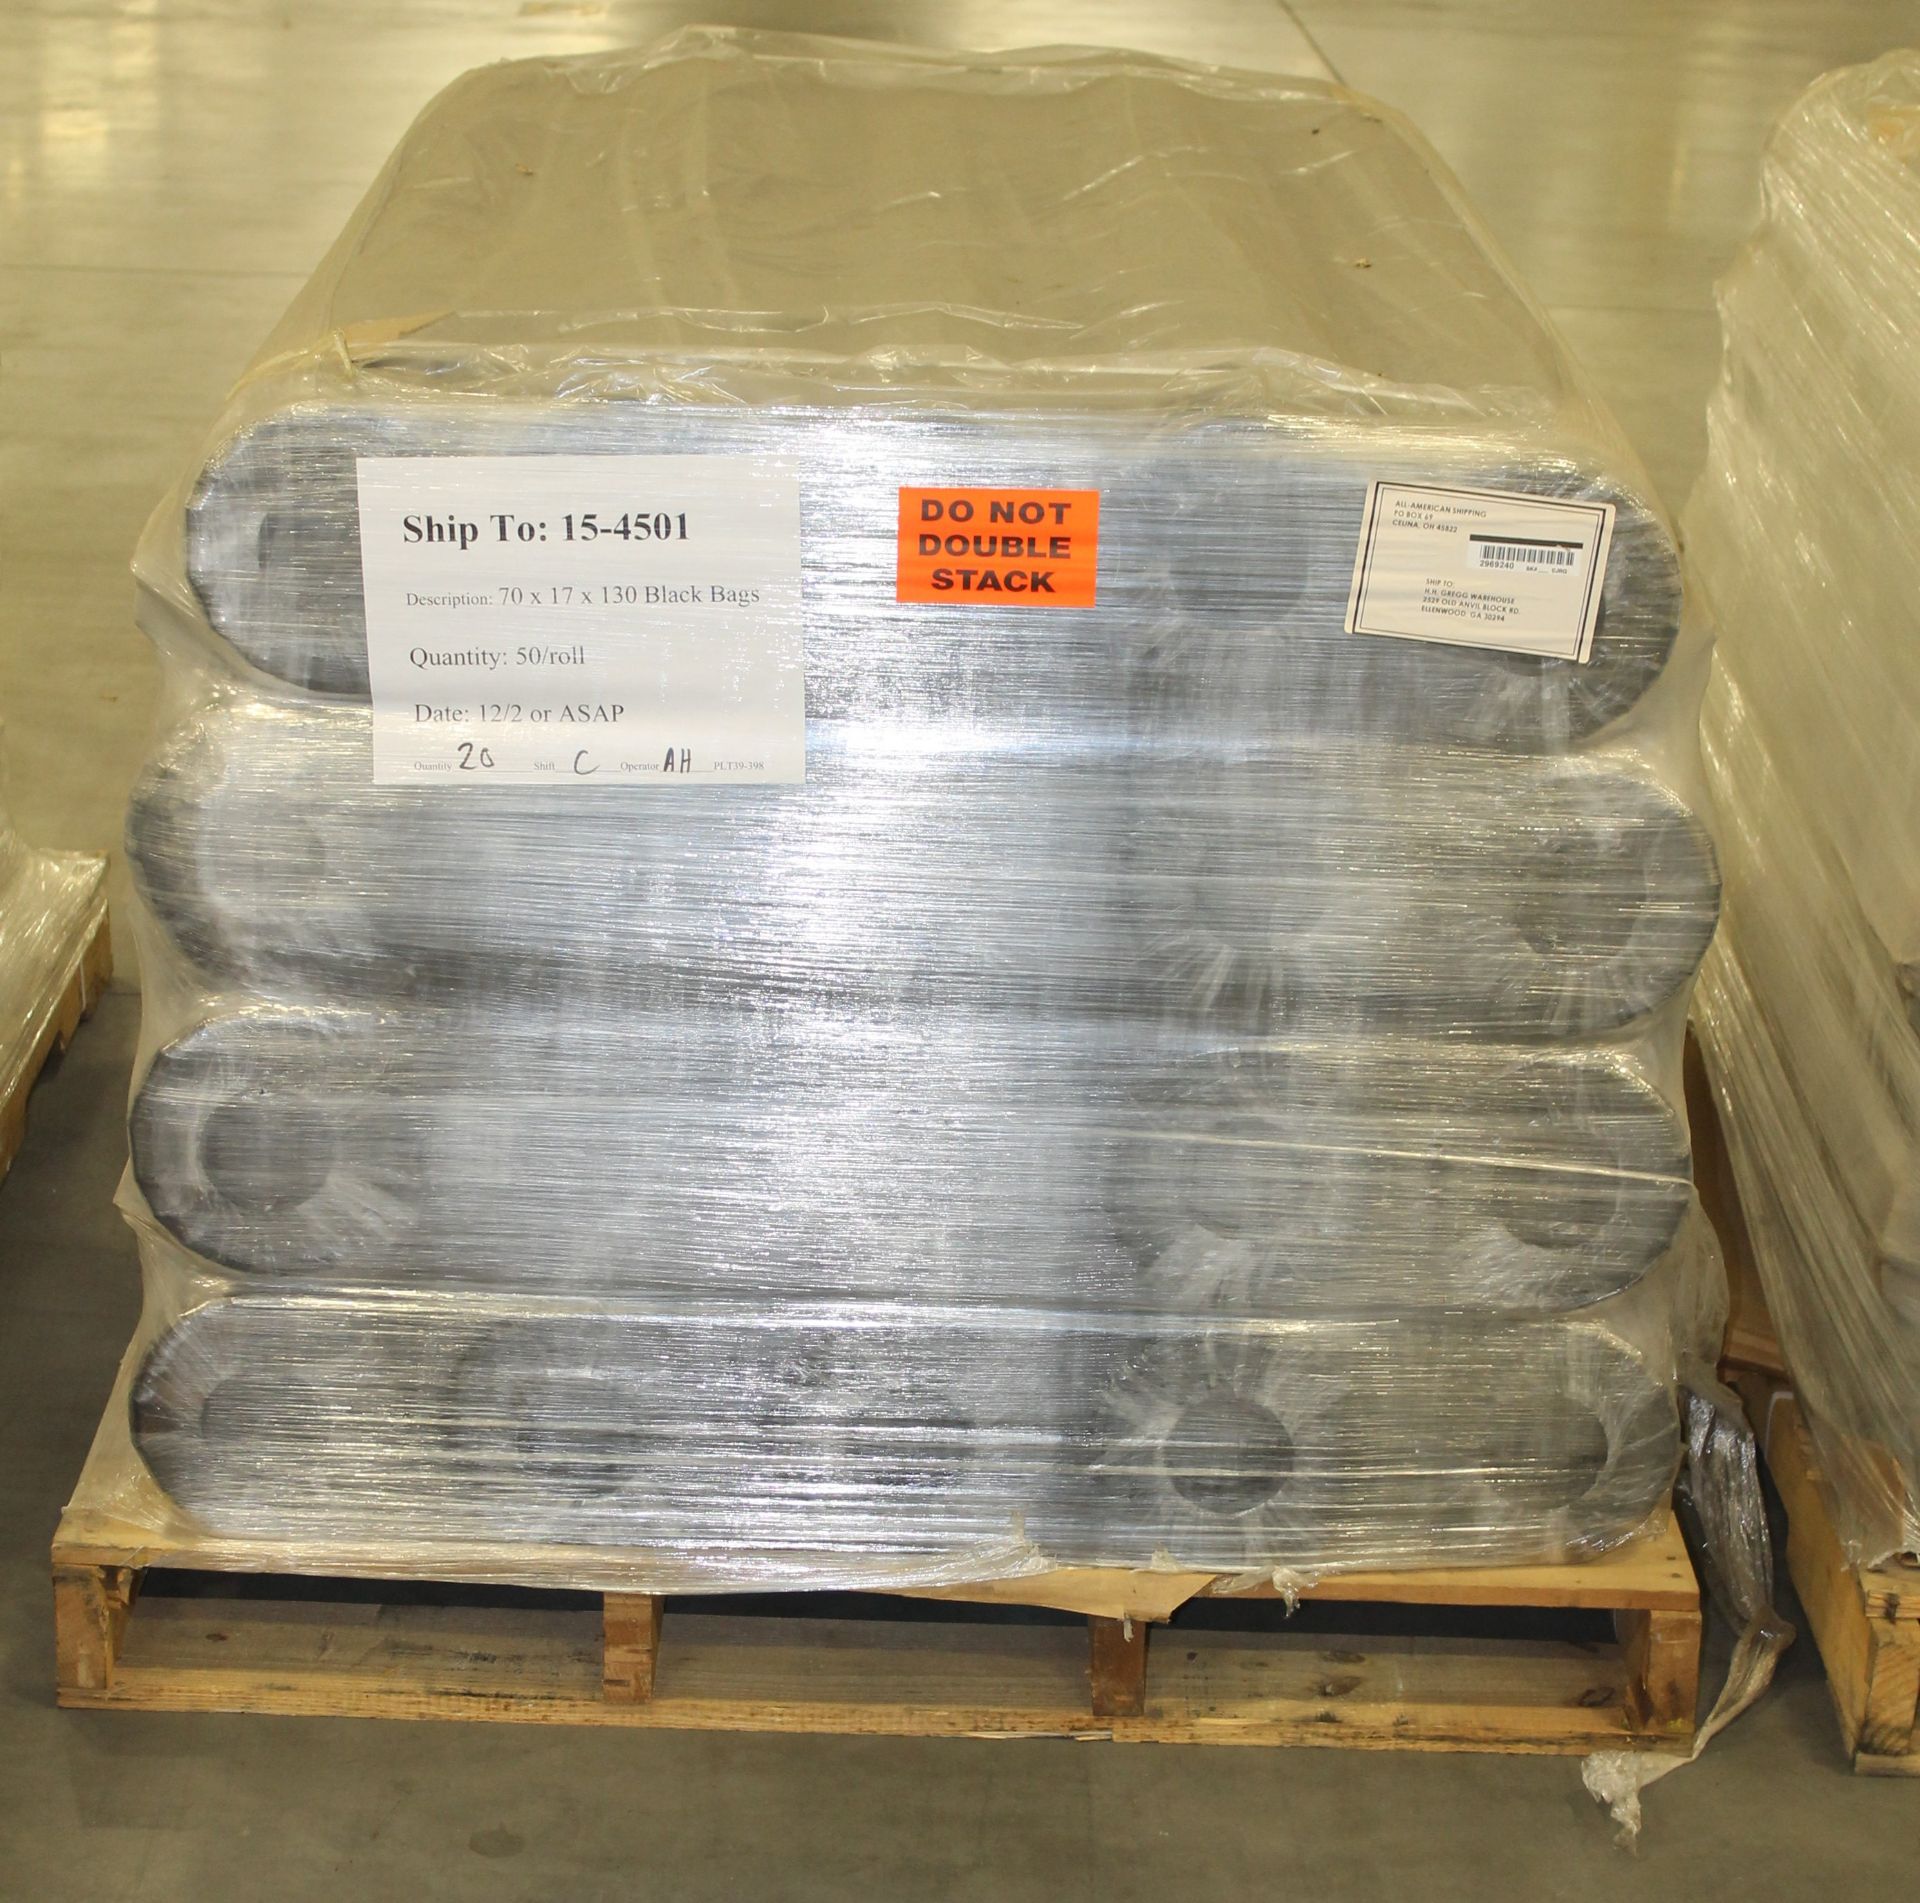 PALLET OF 70 X 17 X 130 BLACK BAGS, - Image 2 of 2